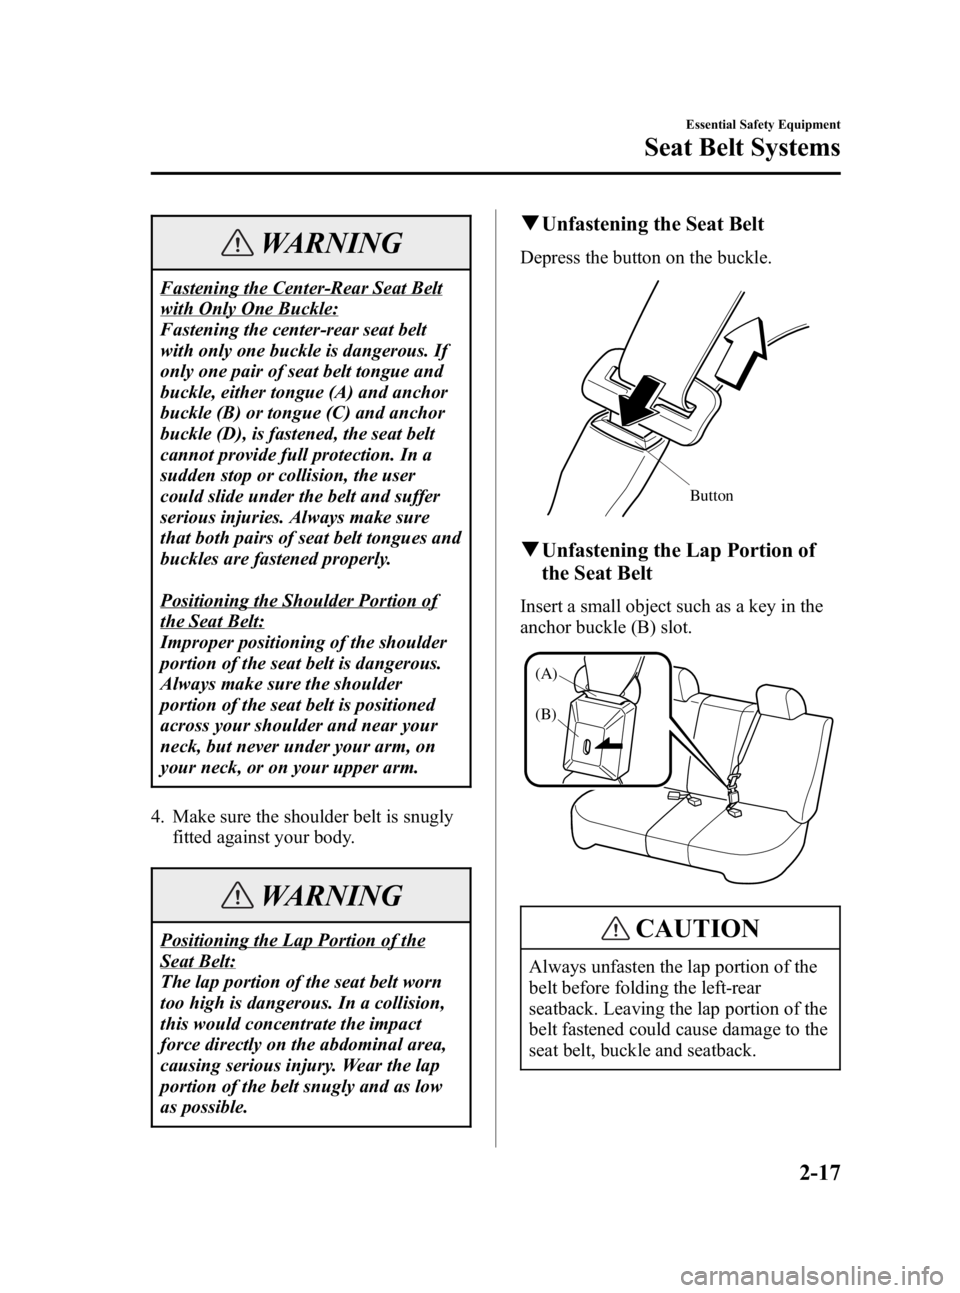 MAZDA MODEL 3 5-DOOR 2005  Owners Manual Black plate (31,1)
WARNING
Fastening the Center-Rear Seat Belt
with Only One Buckle:
Fastening the center-rear seat belt
with only one buckle is dangerous. If
only one pair of seat belt tongue and
buc